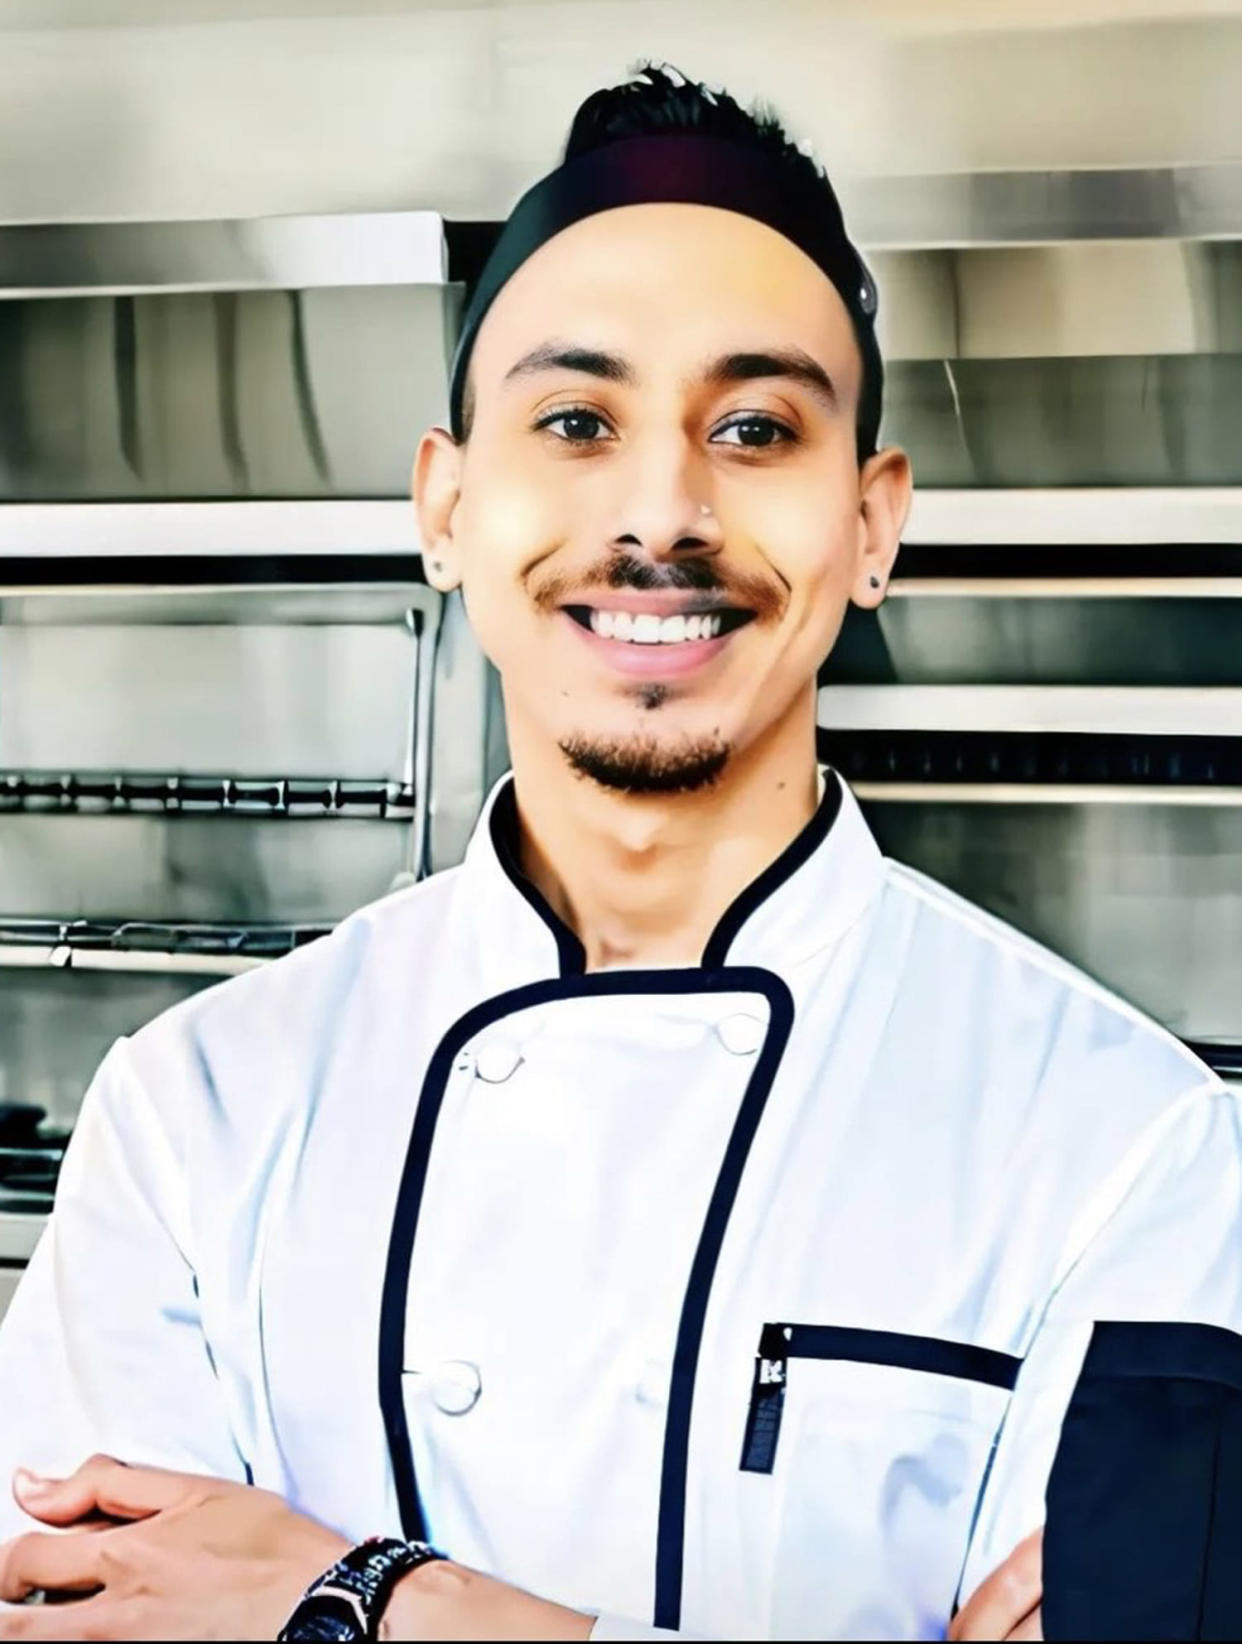 Chris Lopez, a chef in Dallas, Texas, was diagnosed with colon cancer at 30. (Courtesy Chris Lopez)